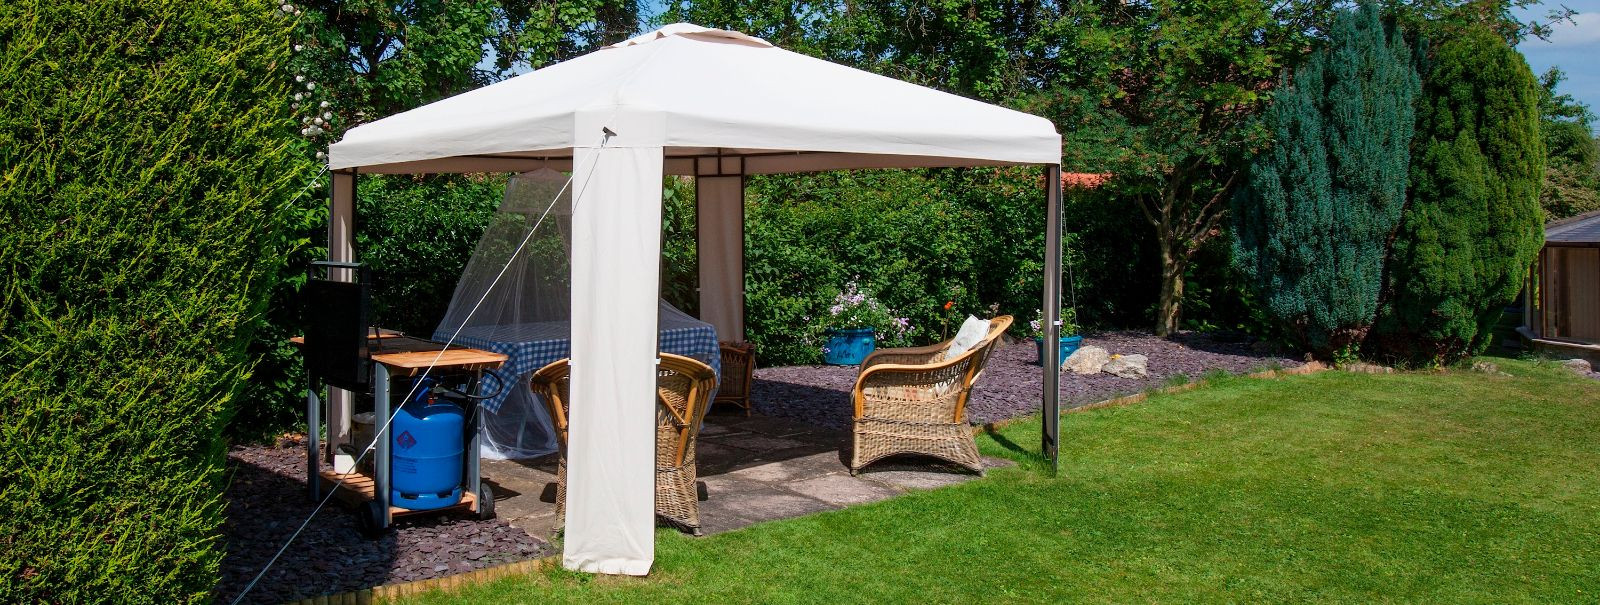 Outdoor canopies are a stylish and functional addition to any home's exterior. They provide shade, shelter, and a defined space for relaxation and entertainment